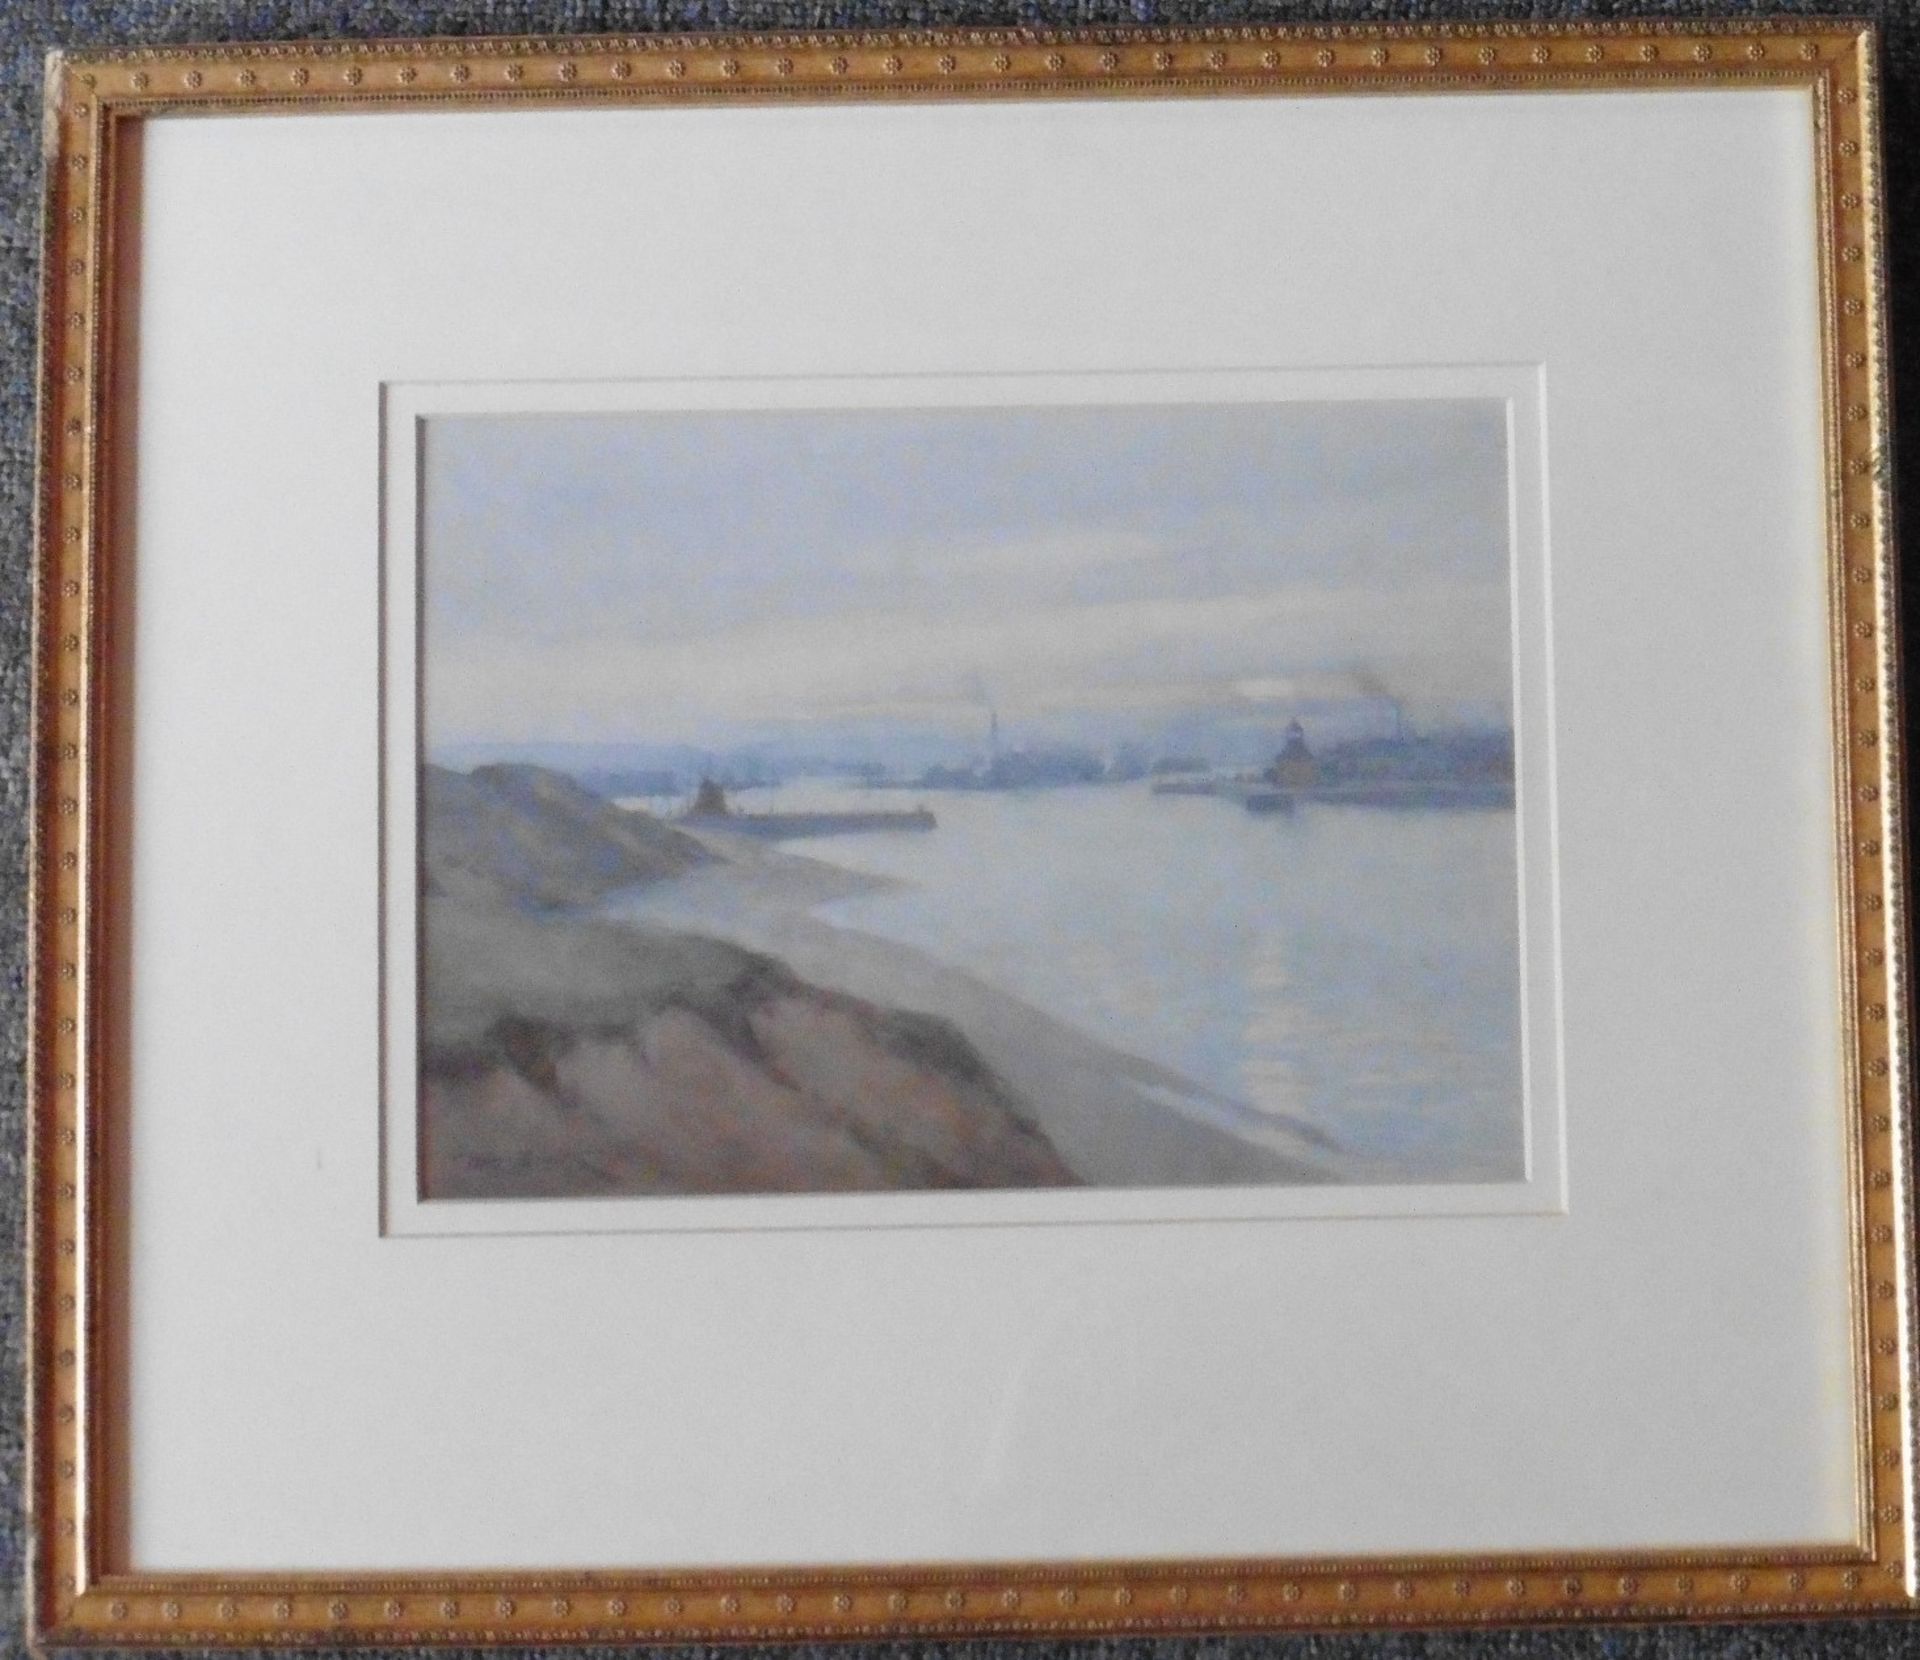 Tom Smith,FL 1914-1943, exhibited R.S.A, R.S.W signed Watercolour “Aberdeen harbour” - Image 3 of 4